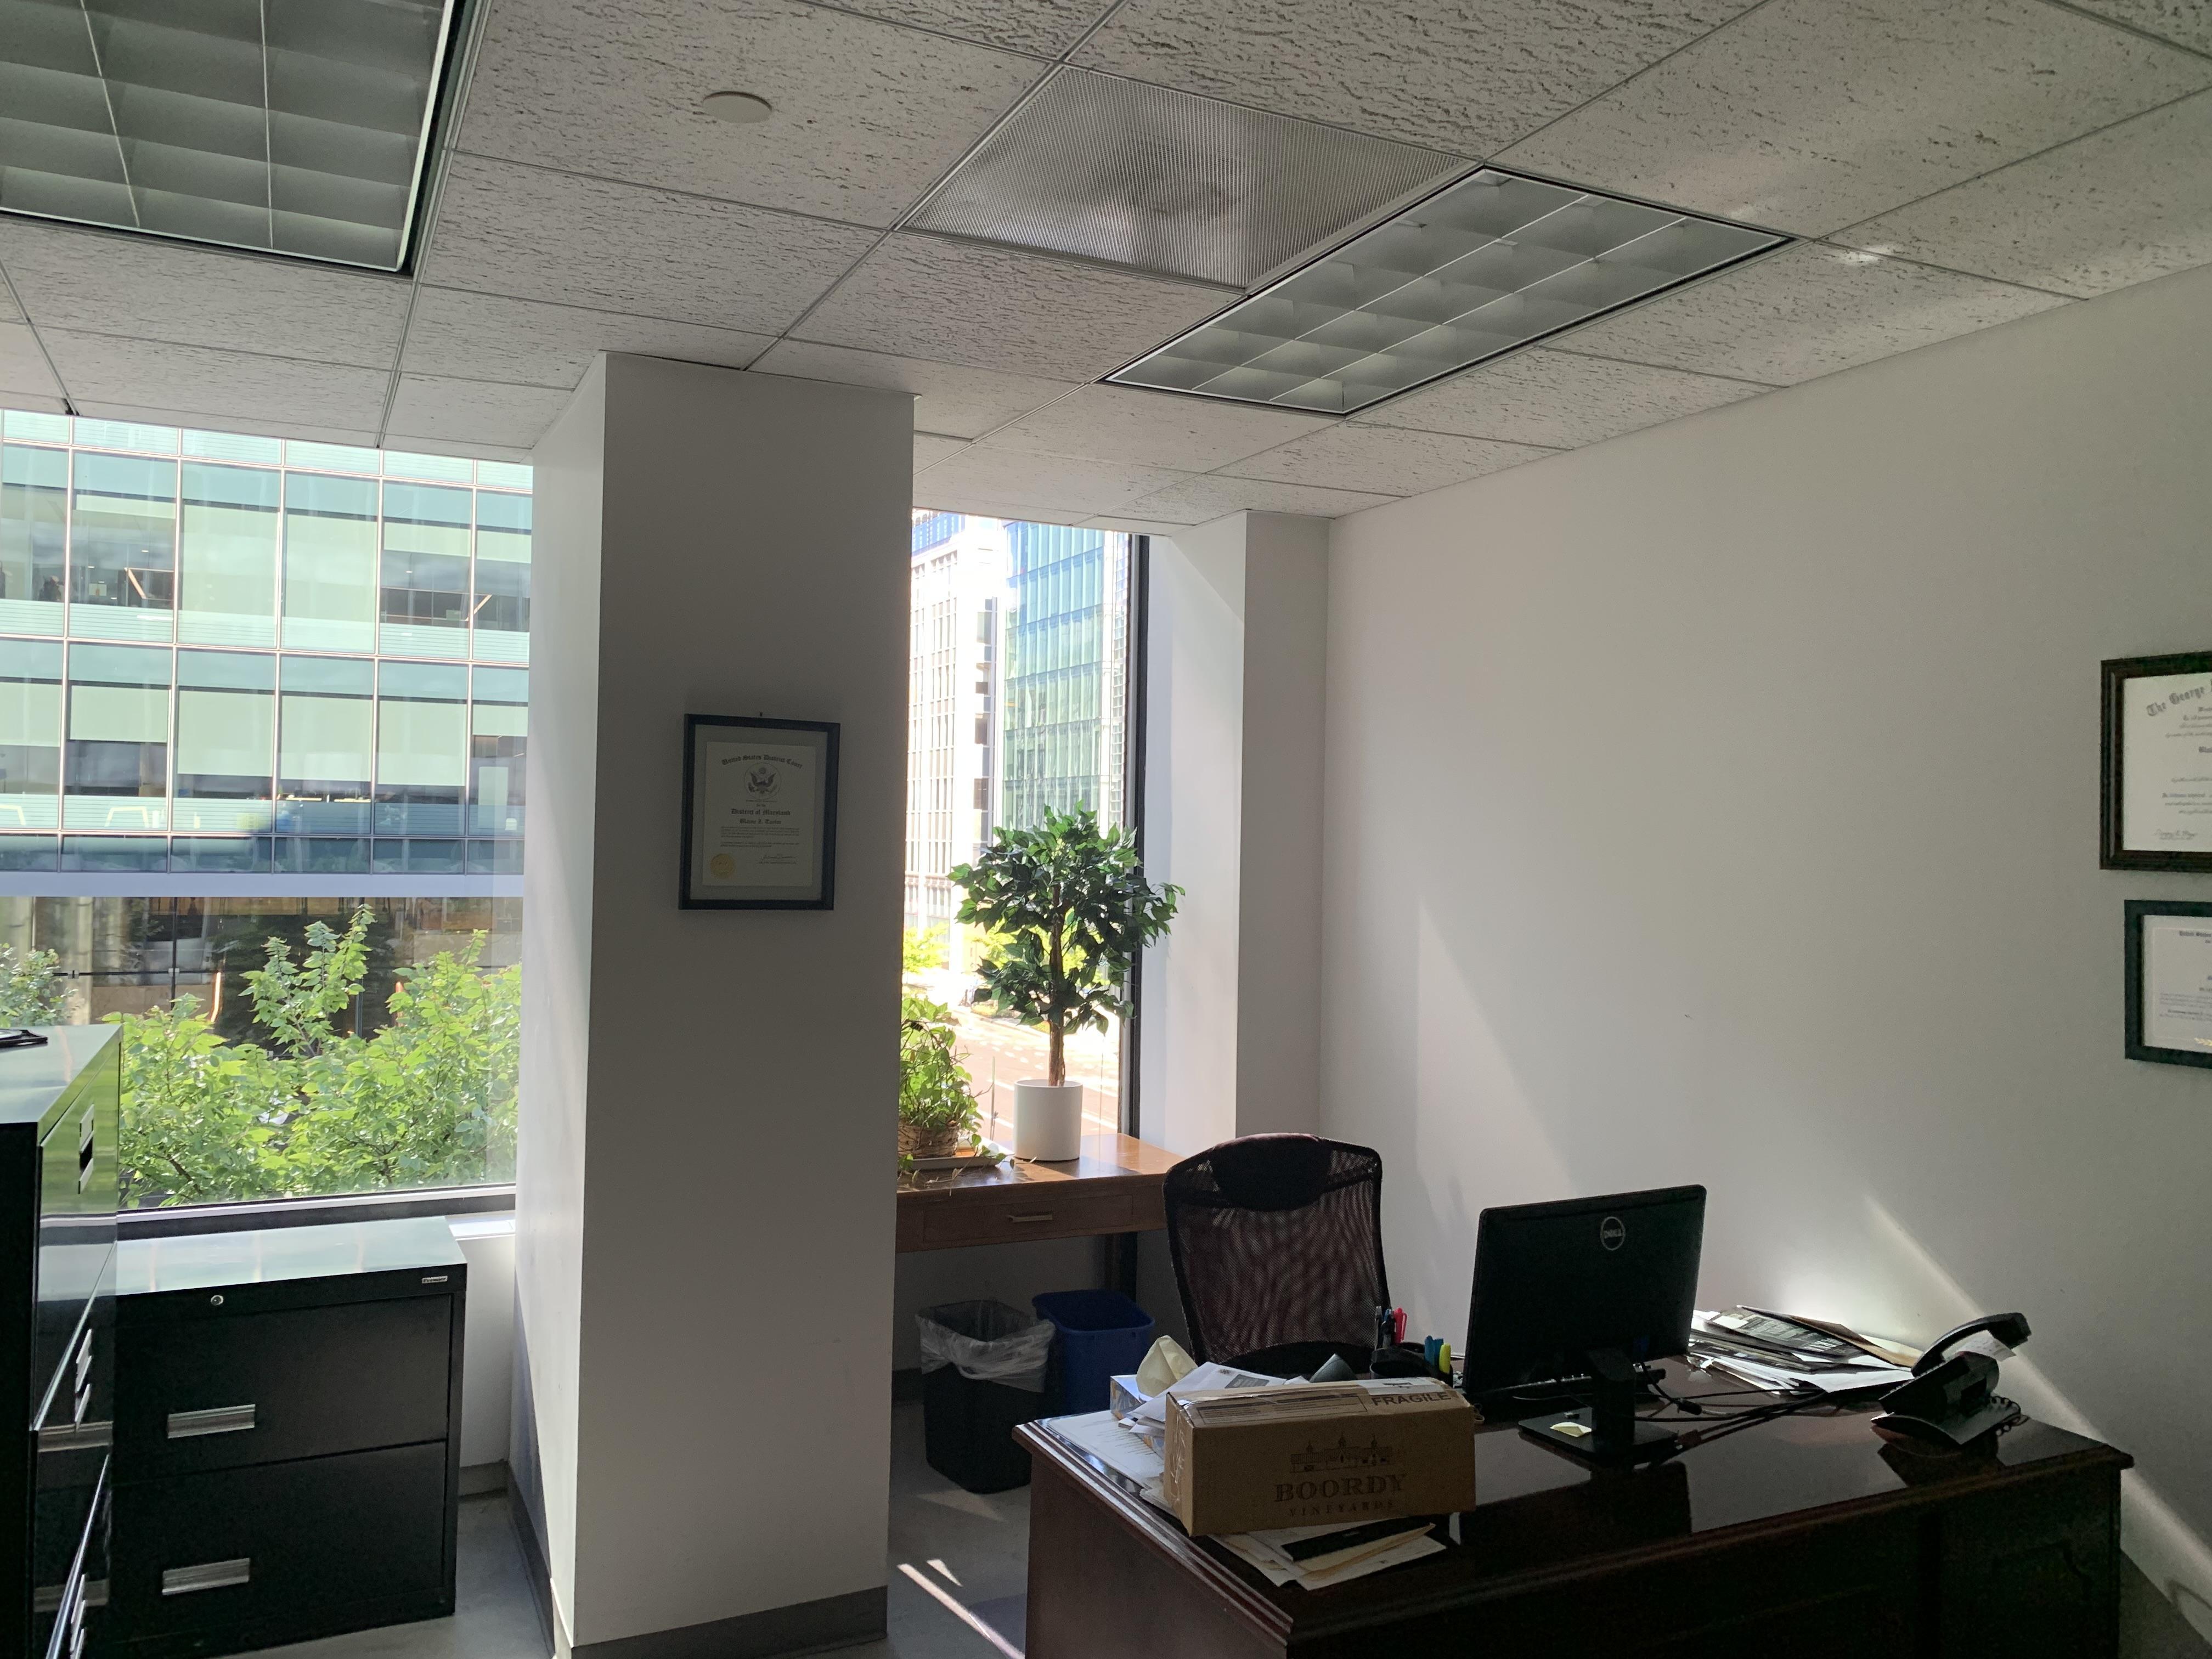 1920 L Street NW Washington DC Large windowed office with good streetscape view